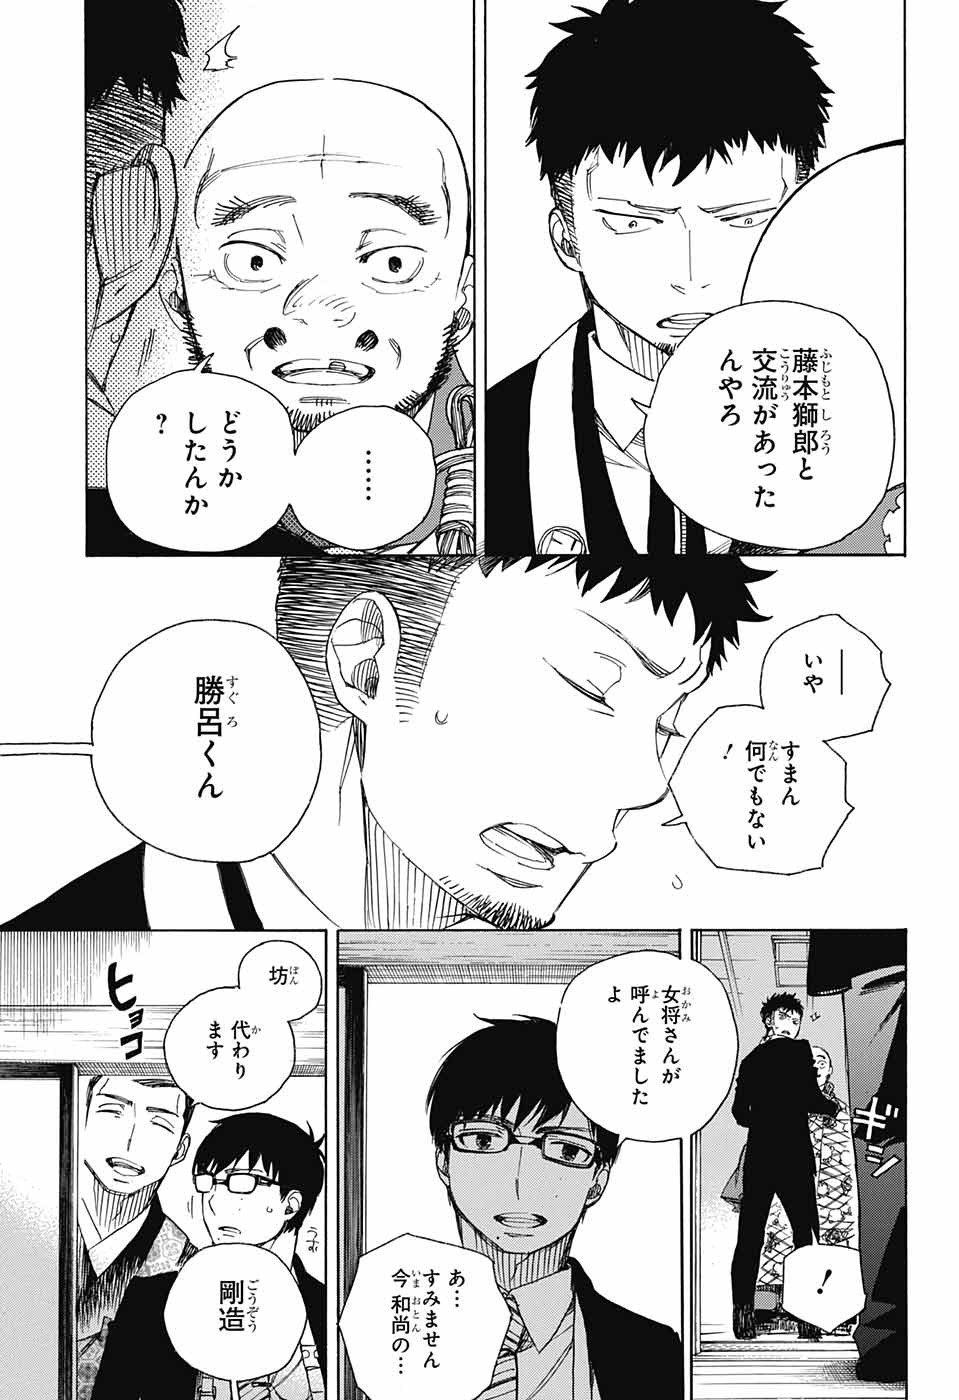 Ao no Exorcist - Chapter 91 - Page 5